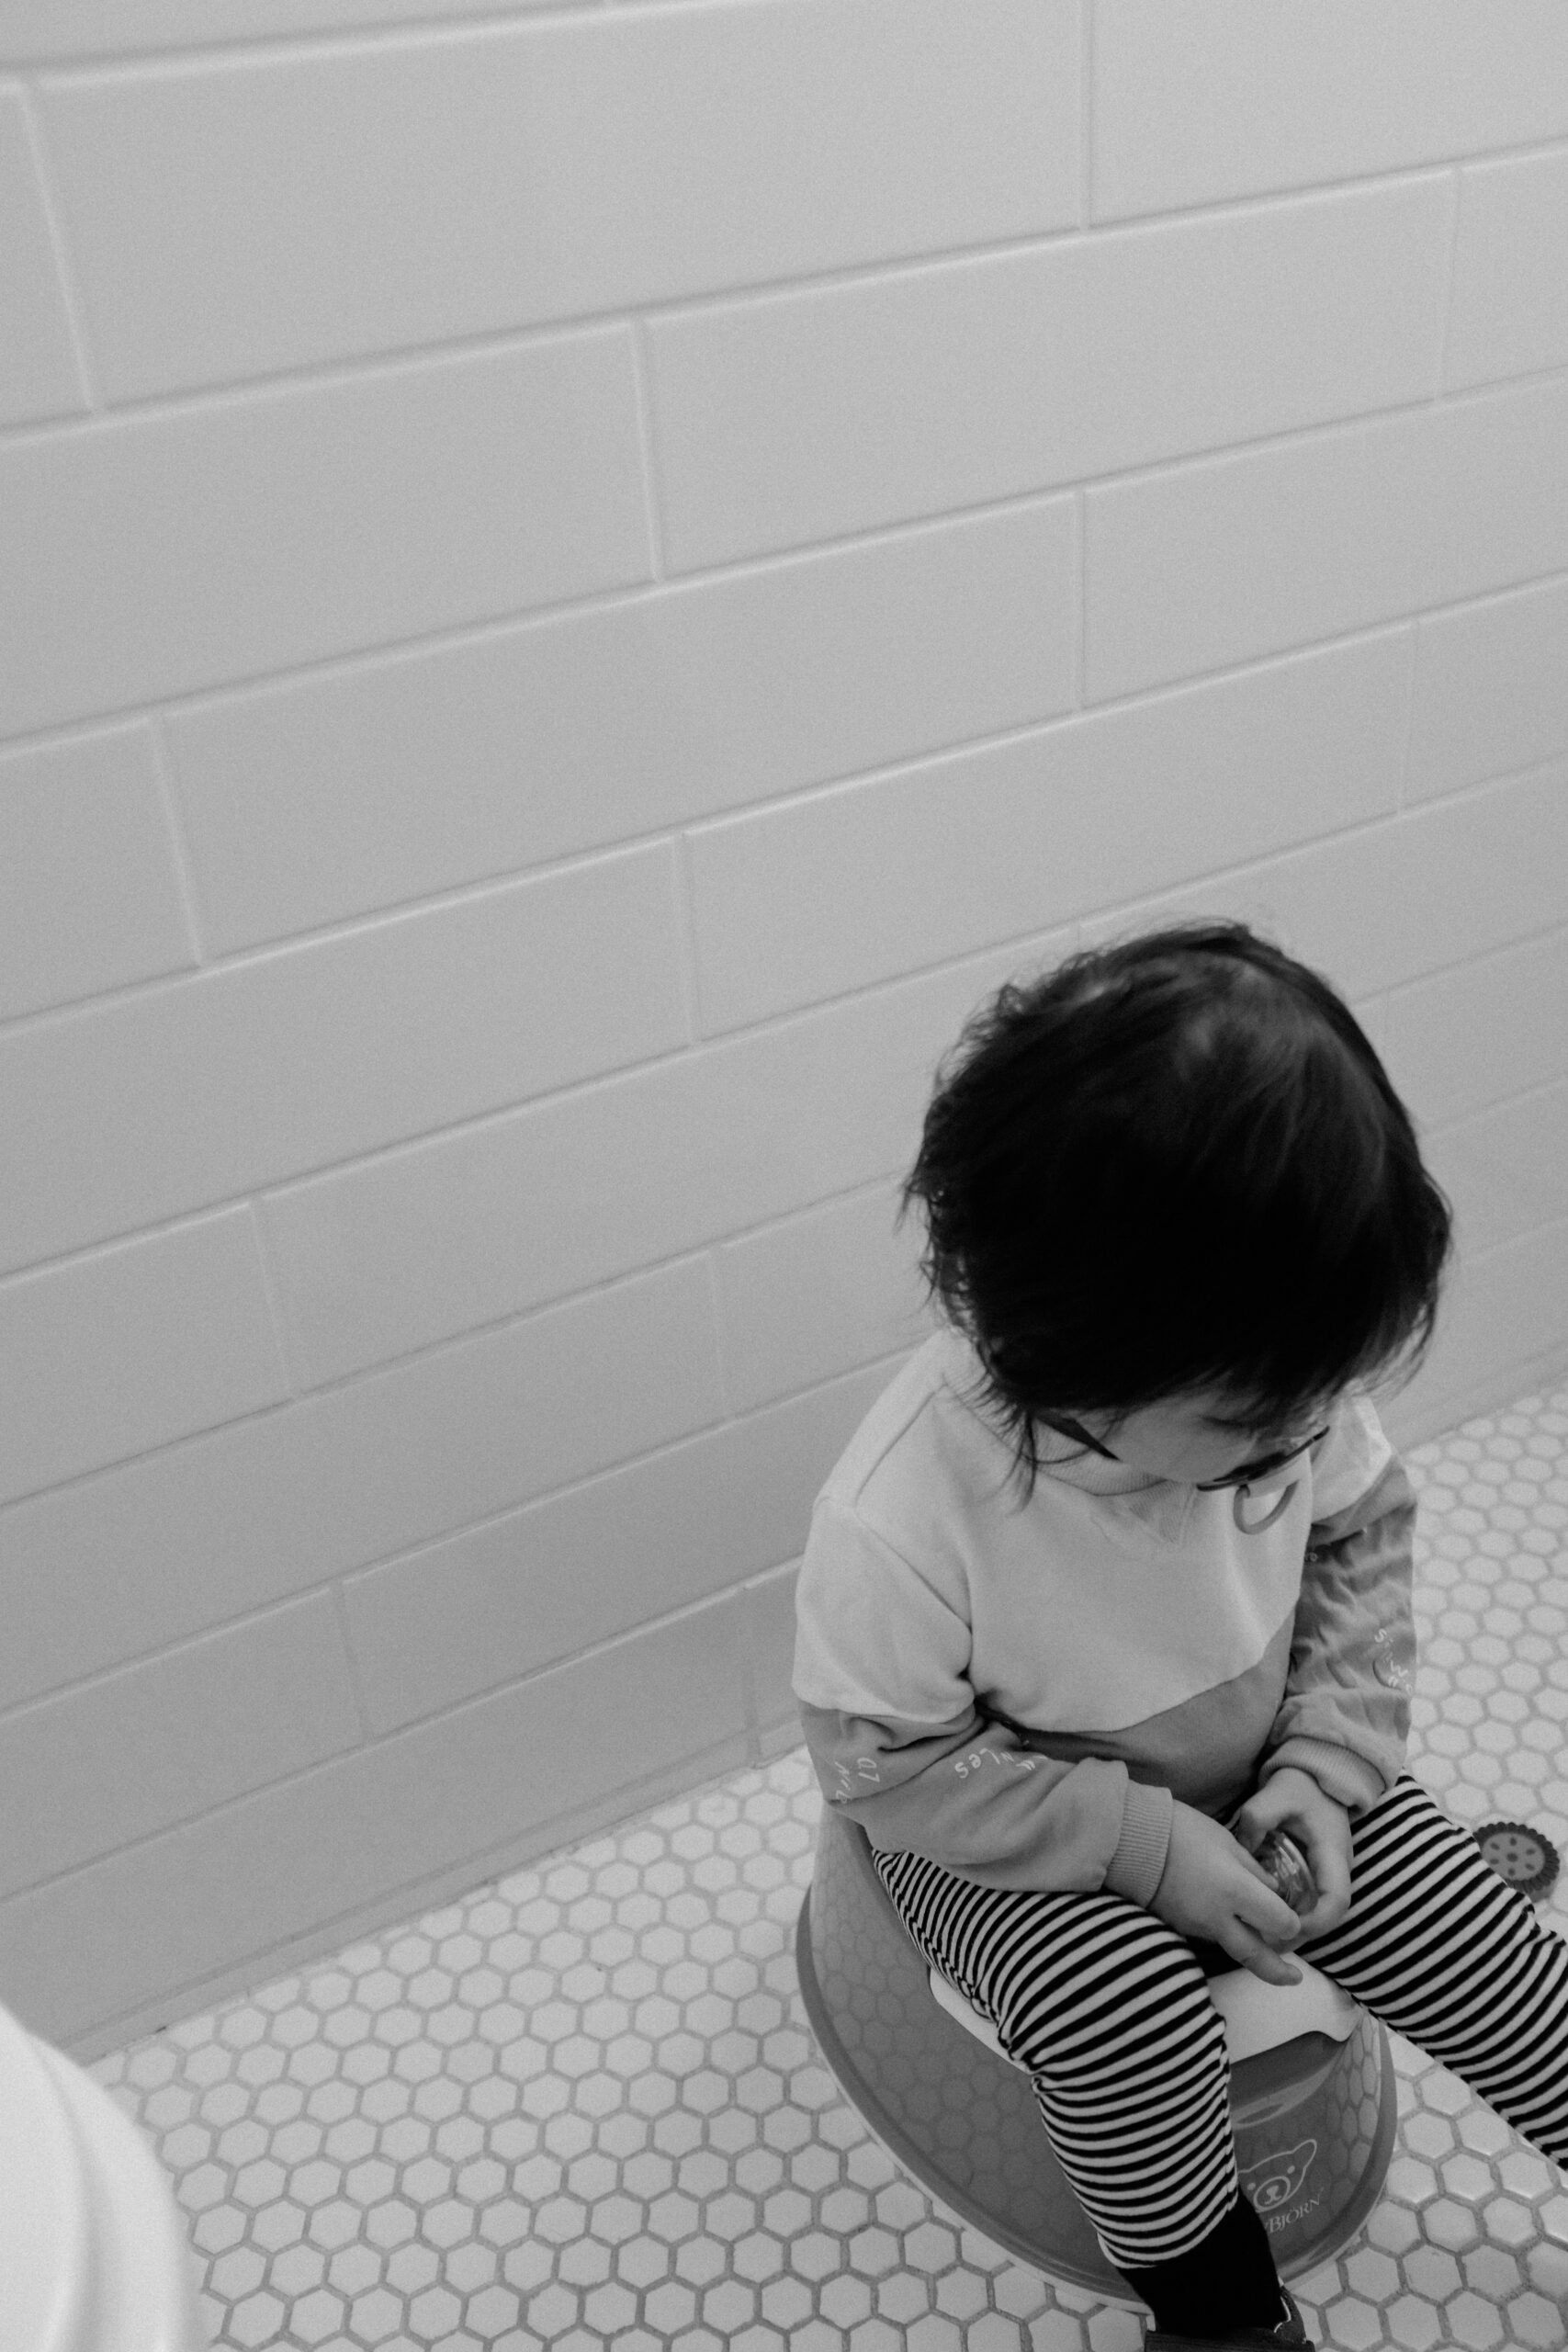 Potty training for naps and bedtime |The Peaceful Sleeper